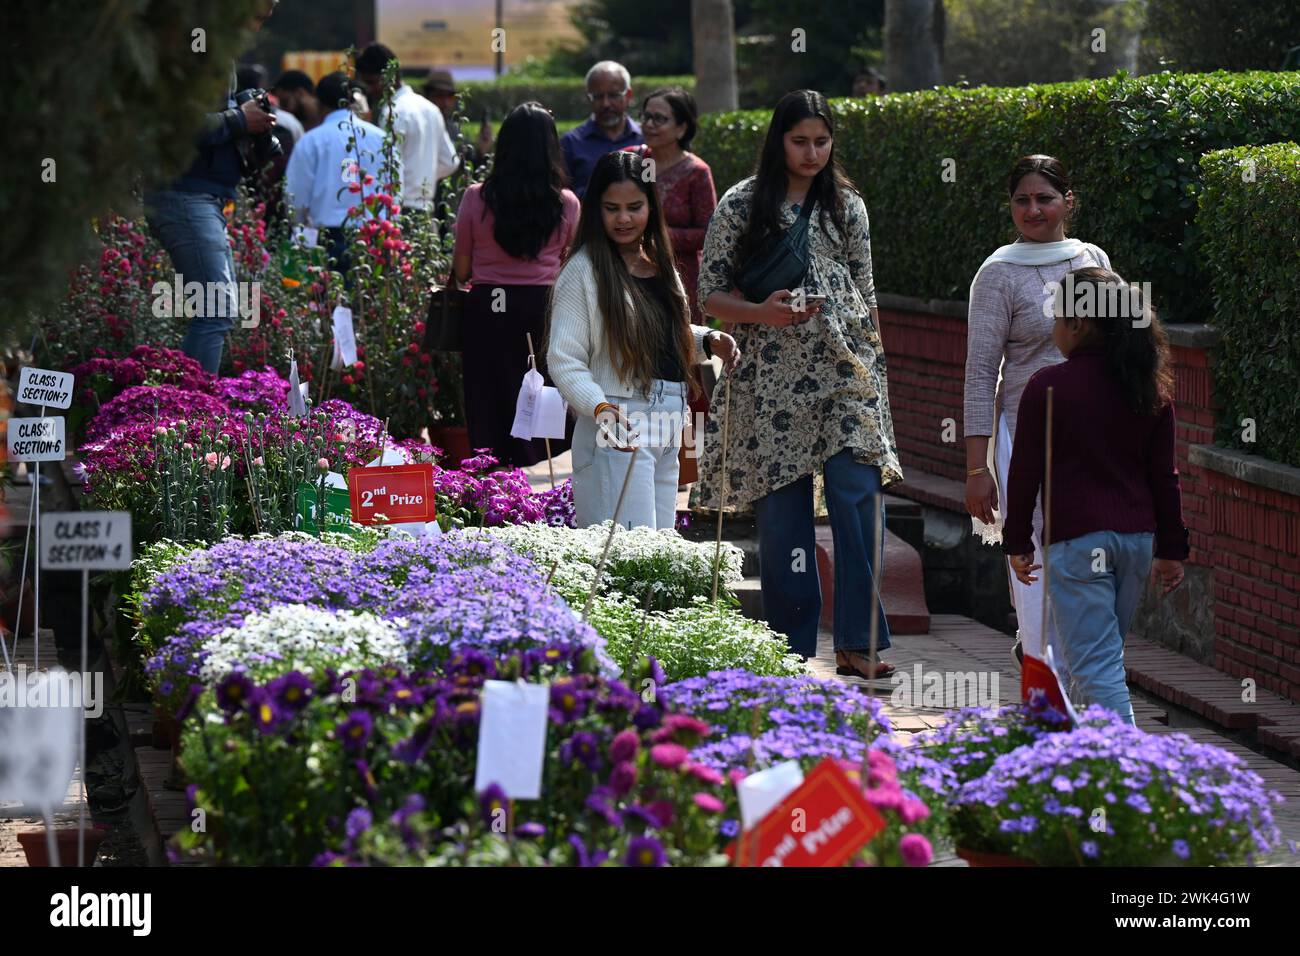 NEW DELHI, INDIA -FEBRUARY 18: Visitors visit during the '36th Garden Tourism Festival' organized by Delhi Tourism in collaboration with the Delhi Government held at Garden of Five Senses, on February 18, 2024 in New Delhi, India. The theme of the 36th Garden Tourism Festival is “The Earth Laughs in Flowers.” As spring emerges, the earth transforms into a captivating spectacle. The festival features a competition across 32 plant categories, showcasing a diverse range from cacti to dahlias, lilies, roses, chrysanthemums, potted plants, and more. The display includes plants in various states, su Stock Photo